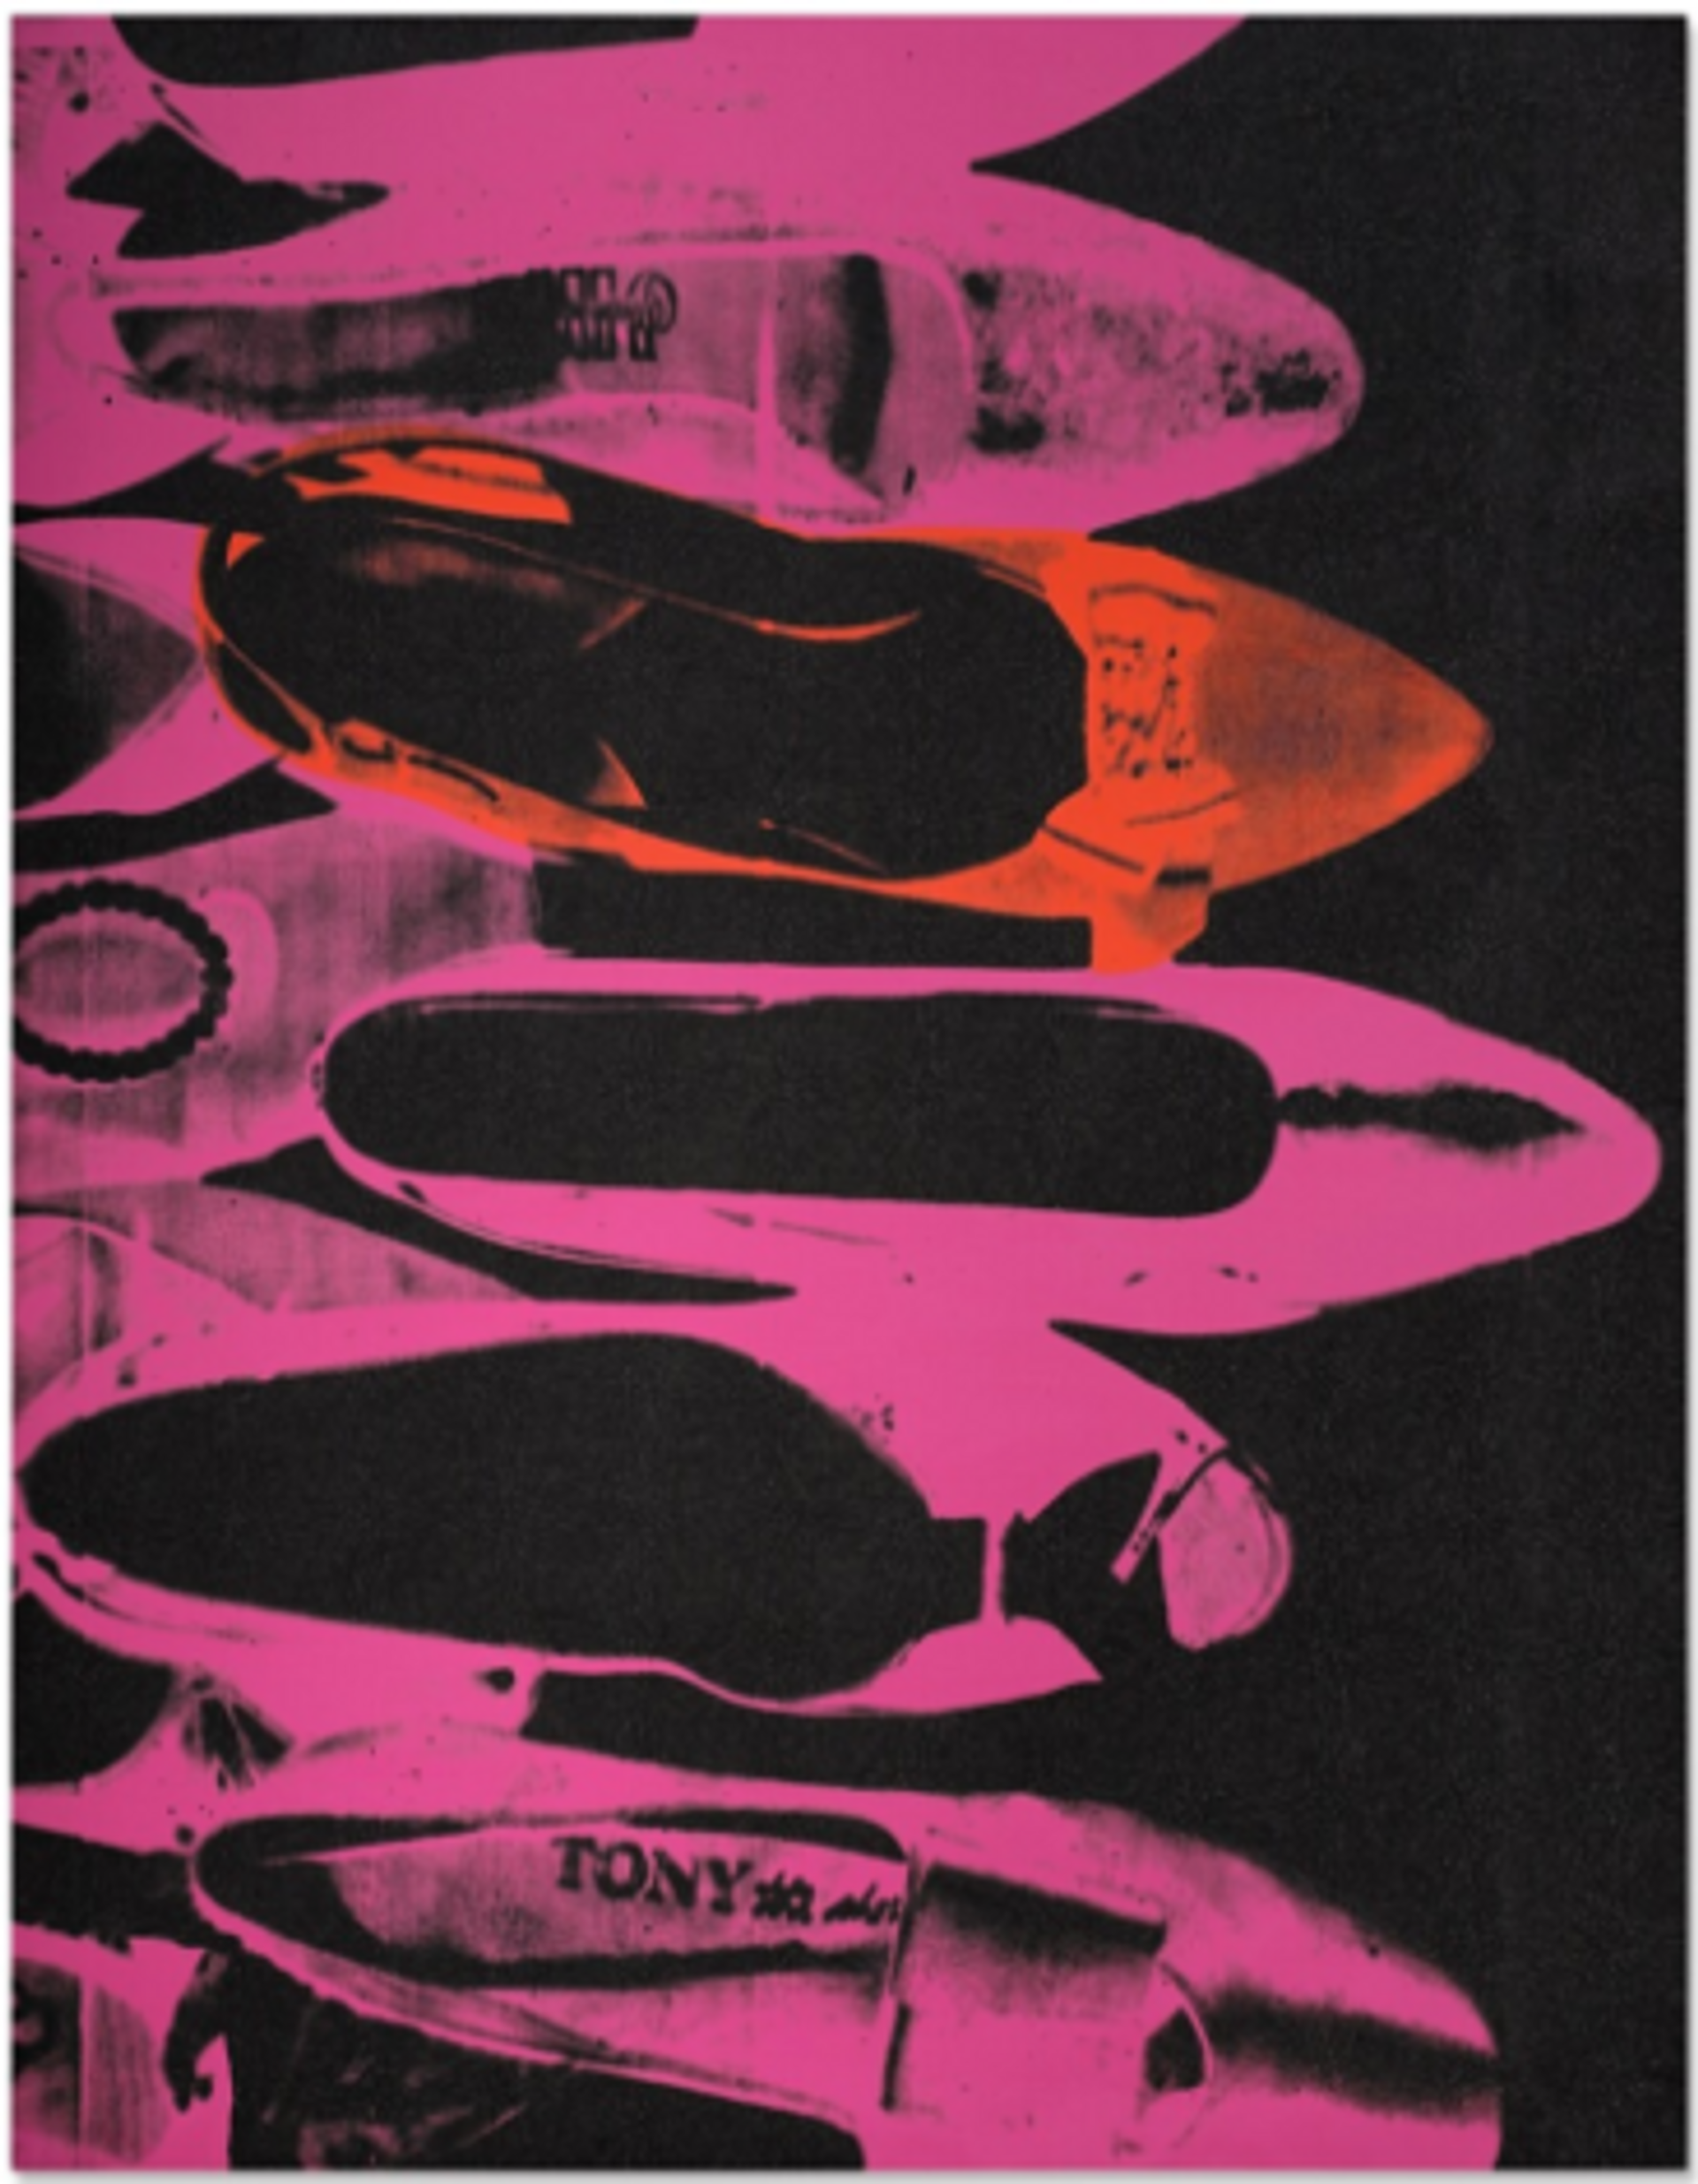 Diamond Dust Shoes - by Andy Warhol